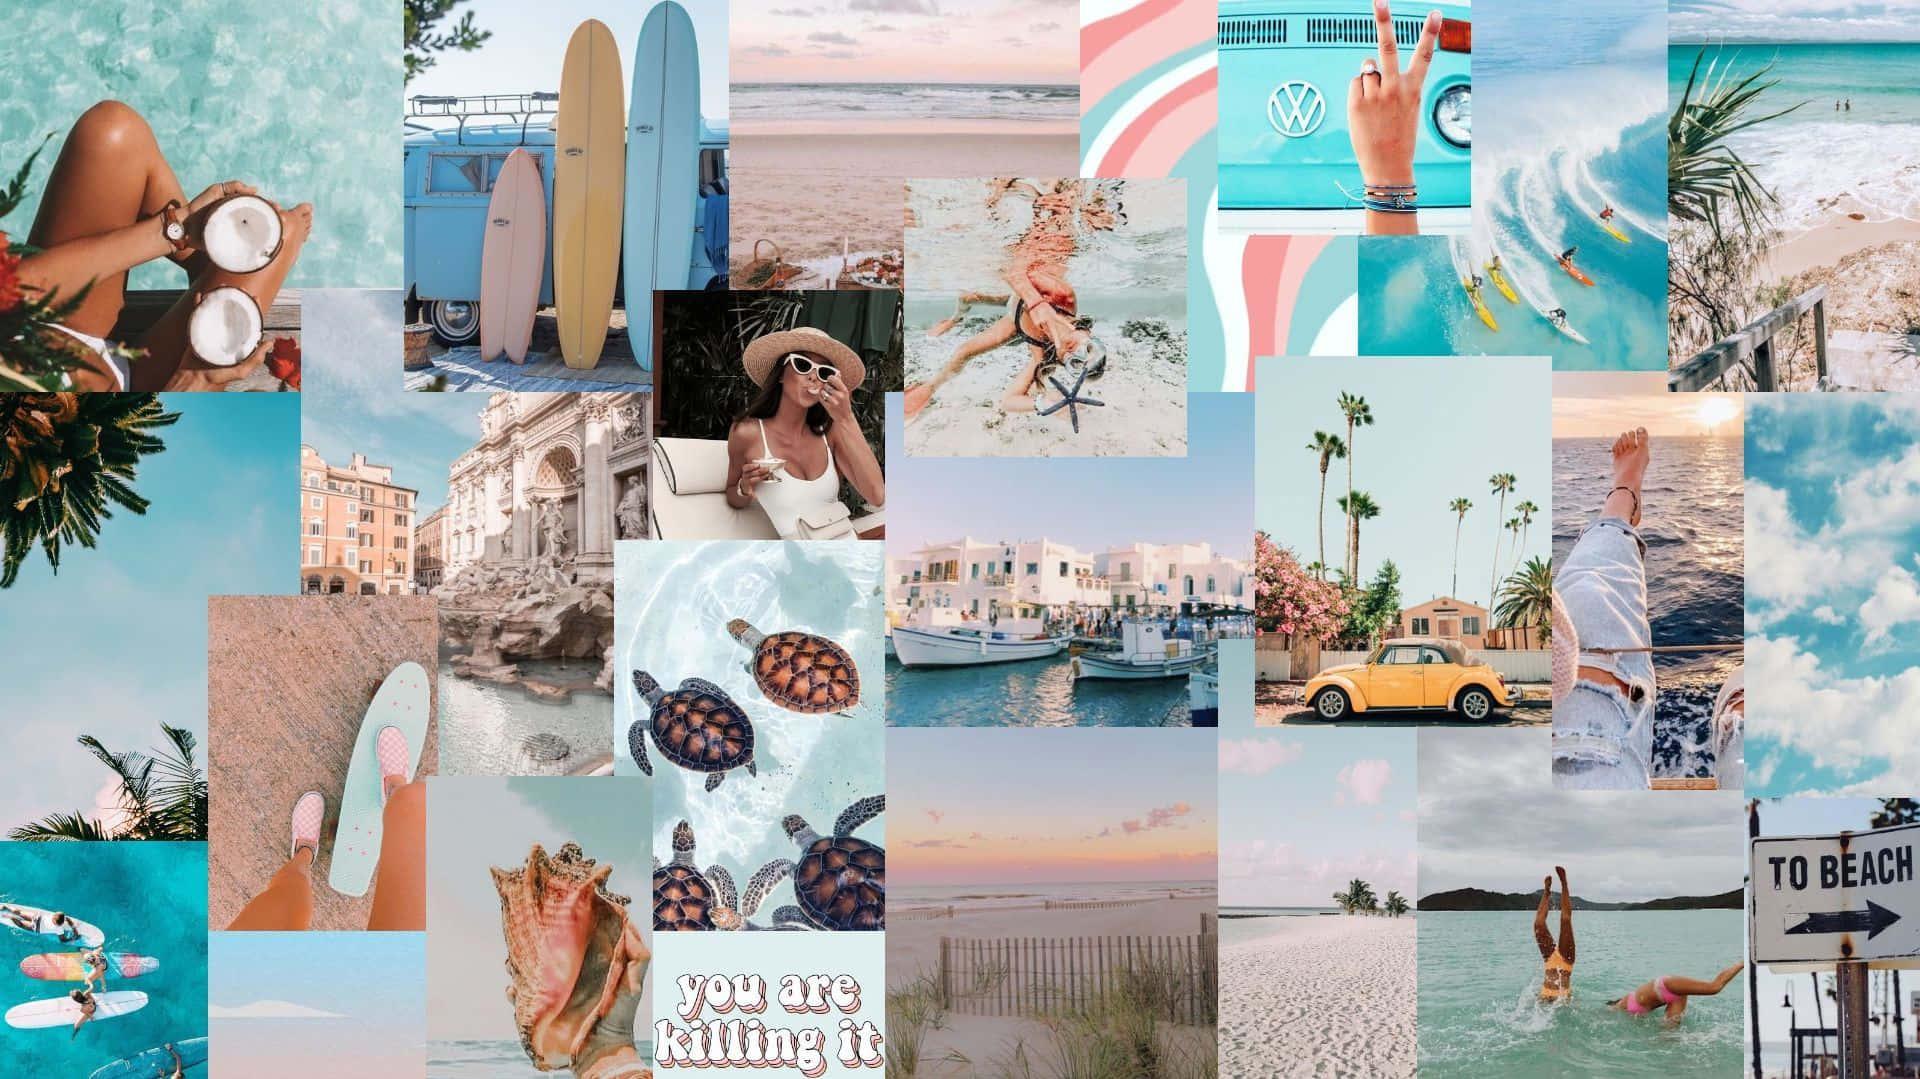 A Collage Of Photos People On The Beach Wallpaper